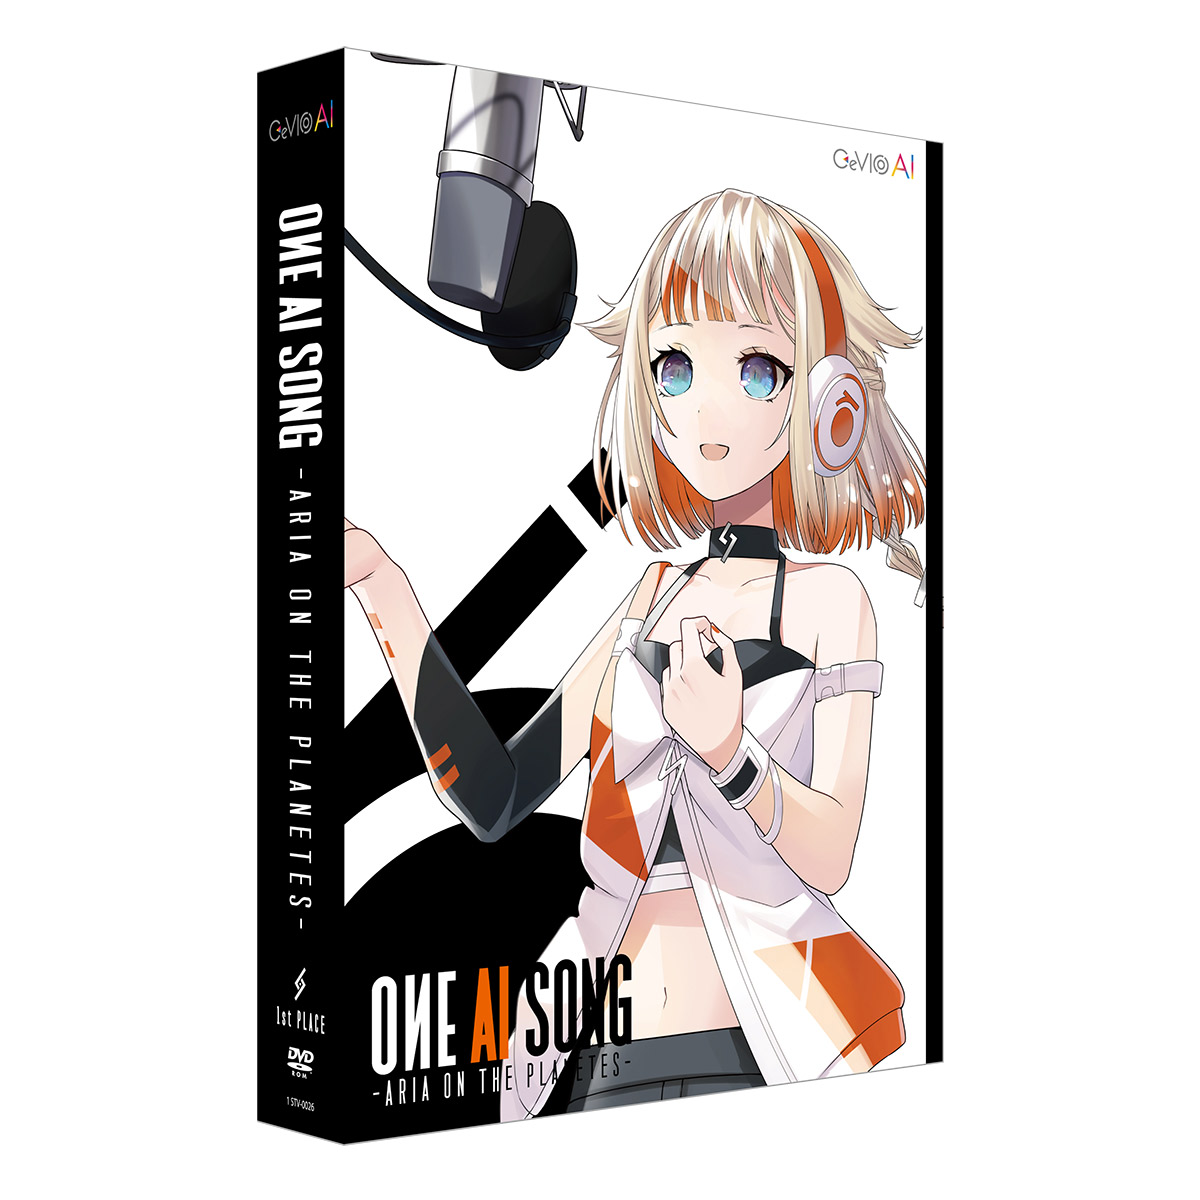 [ limited amount the first times with special favor .!] 1st PLACE OИE AI SONG - ARIA ON THE PLANETES - CeVIO AIsong voice 